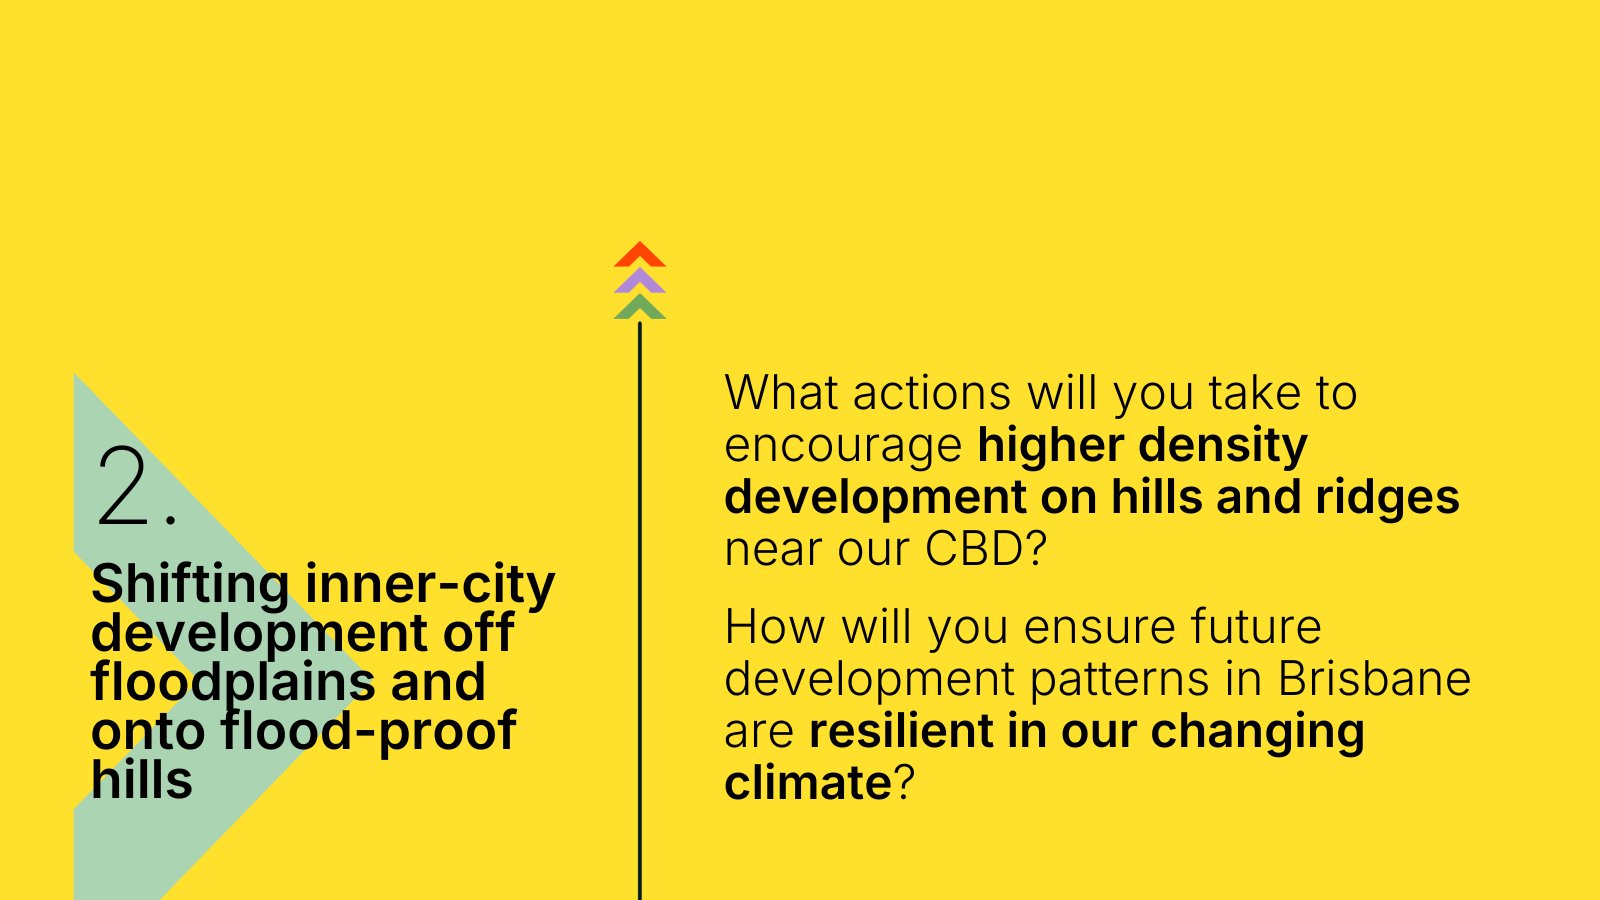 What actions will you take to encourage higher density development on hills and ridges near our CBD? How will you ensure future development patterns in Brisbane are resilient in our changing climate?